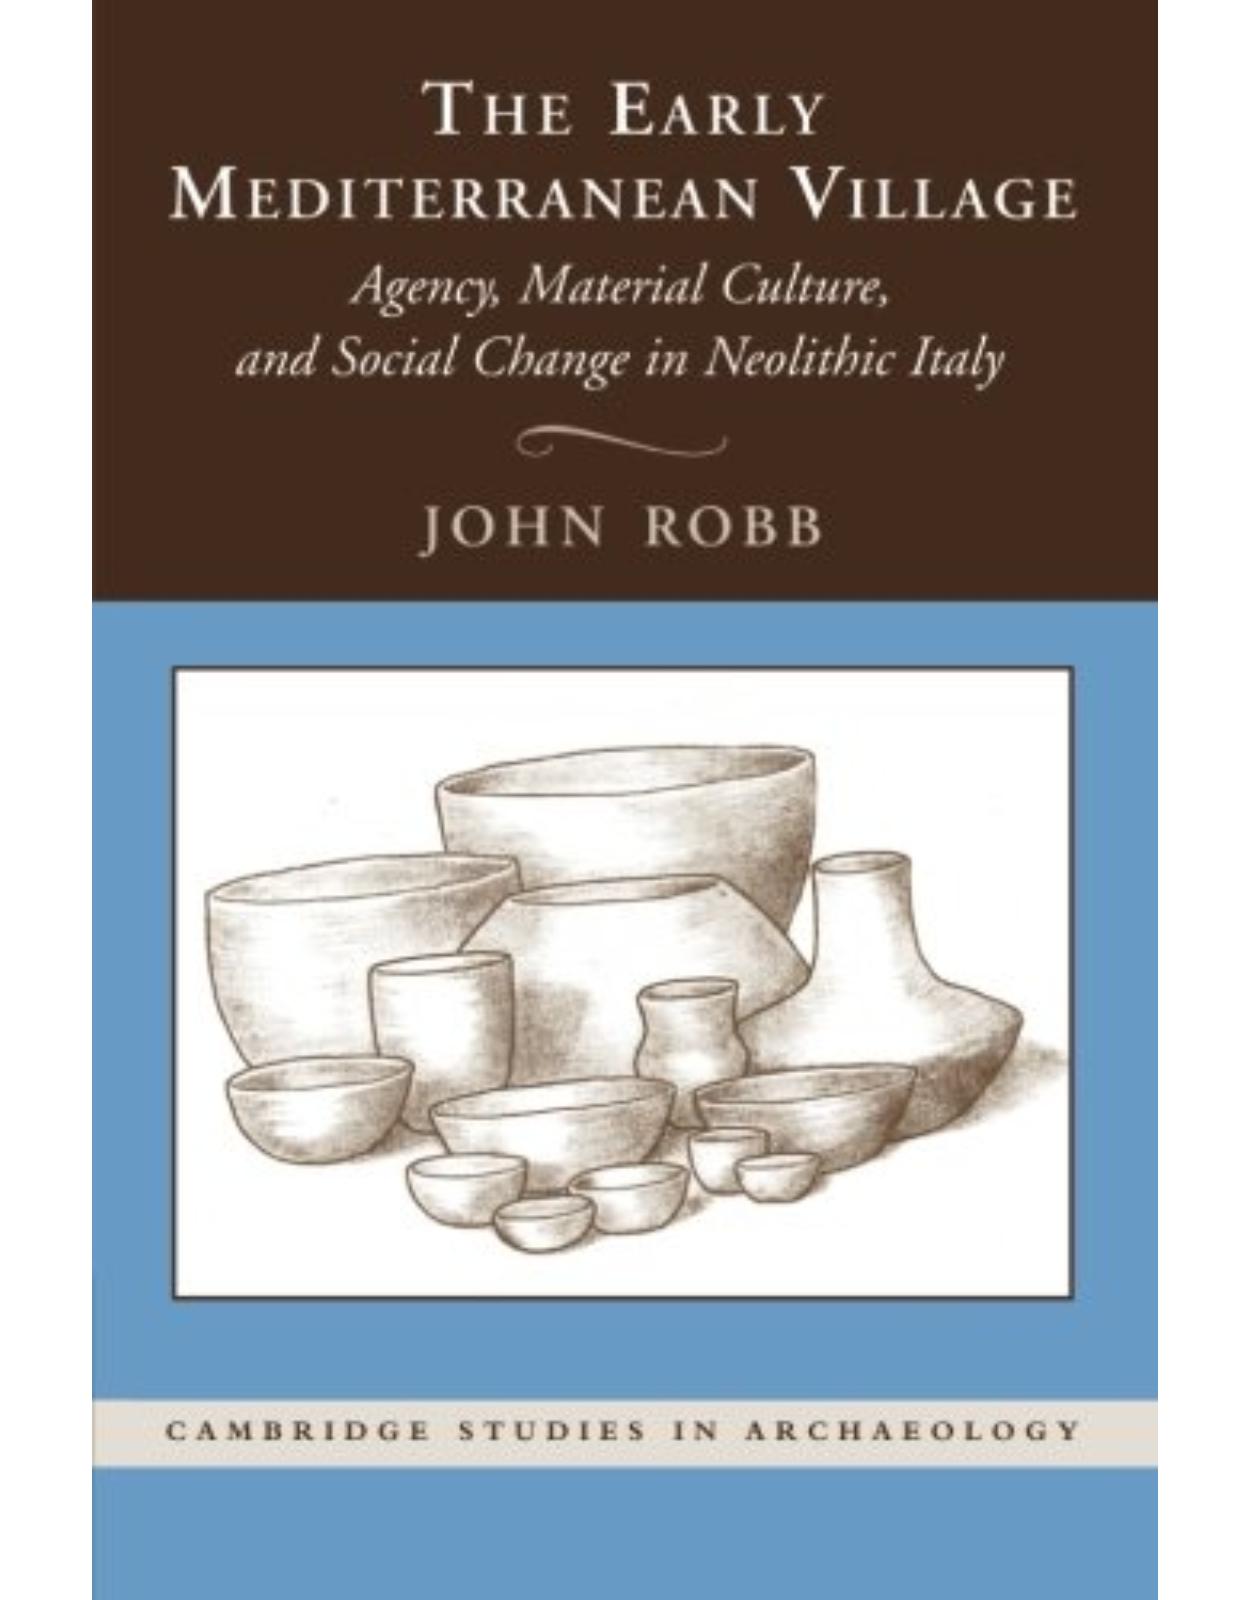 The Early Mediterranean Village: Agency, Material Culture, and Social Change in Neolithic Italy (Cambridge Studies in Archaeology)